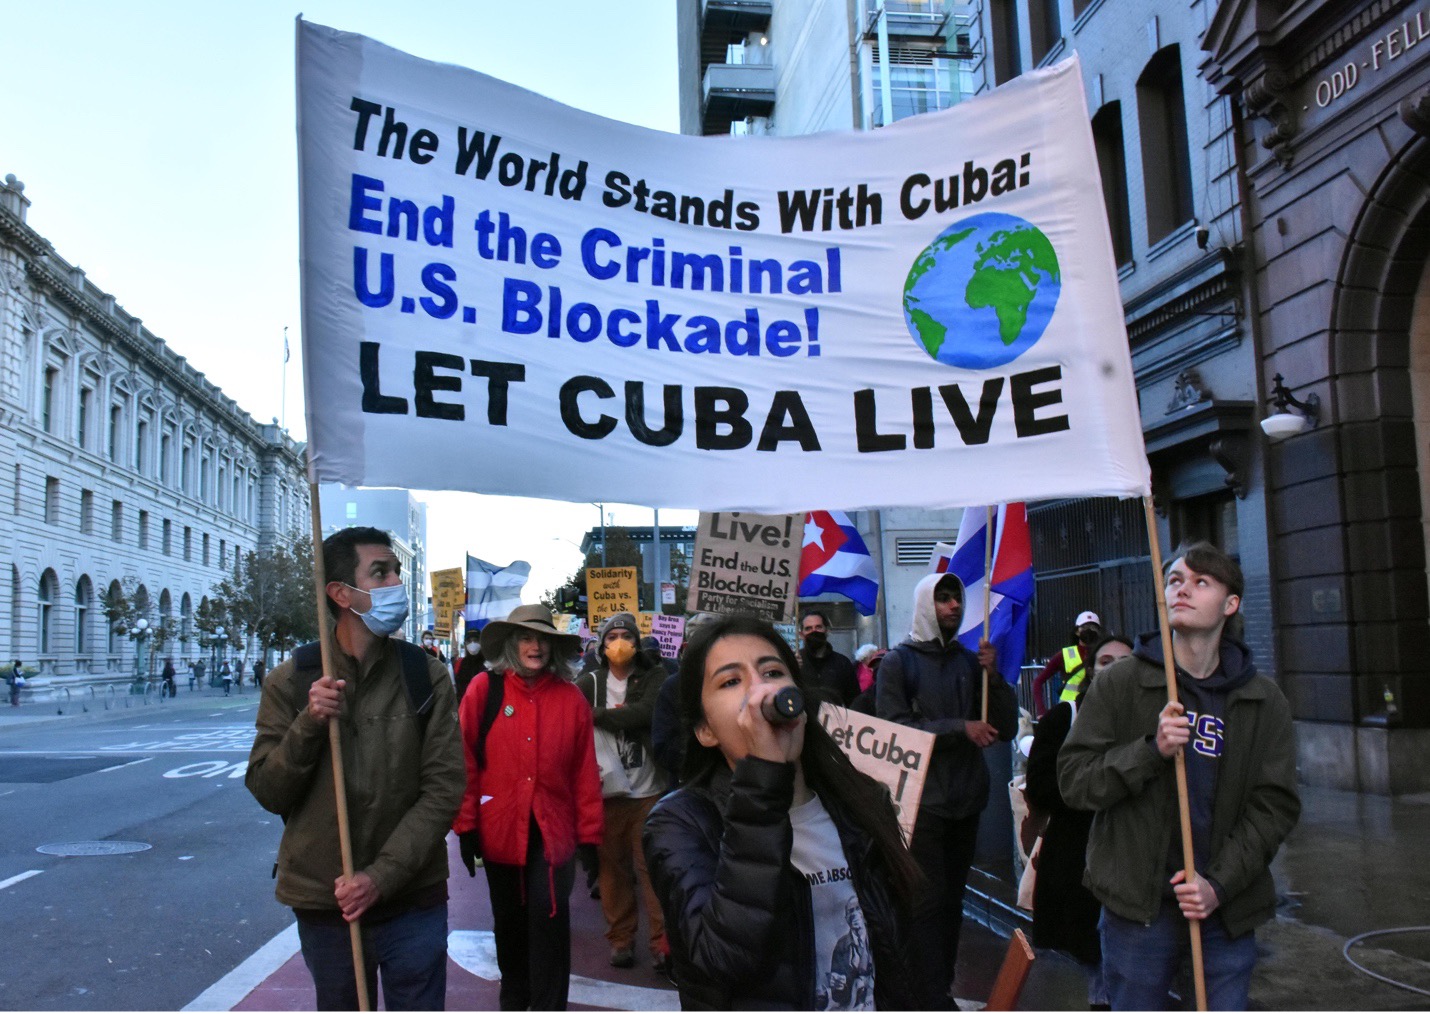 picture of protestors walking down a street with banner that reads: "The world stands with Cuba End the criminal U.S. blockade! LET CUBA LIVE Photo by: Bill Hackwell